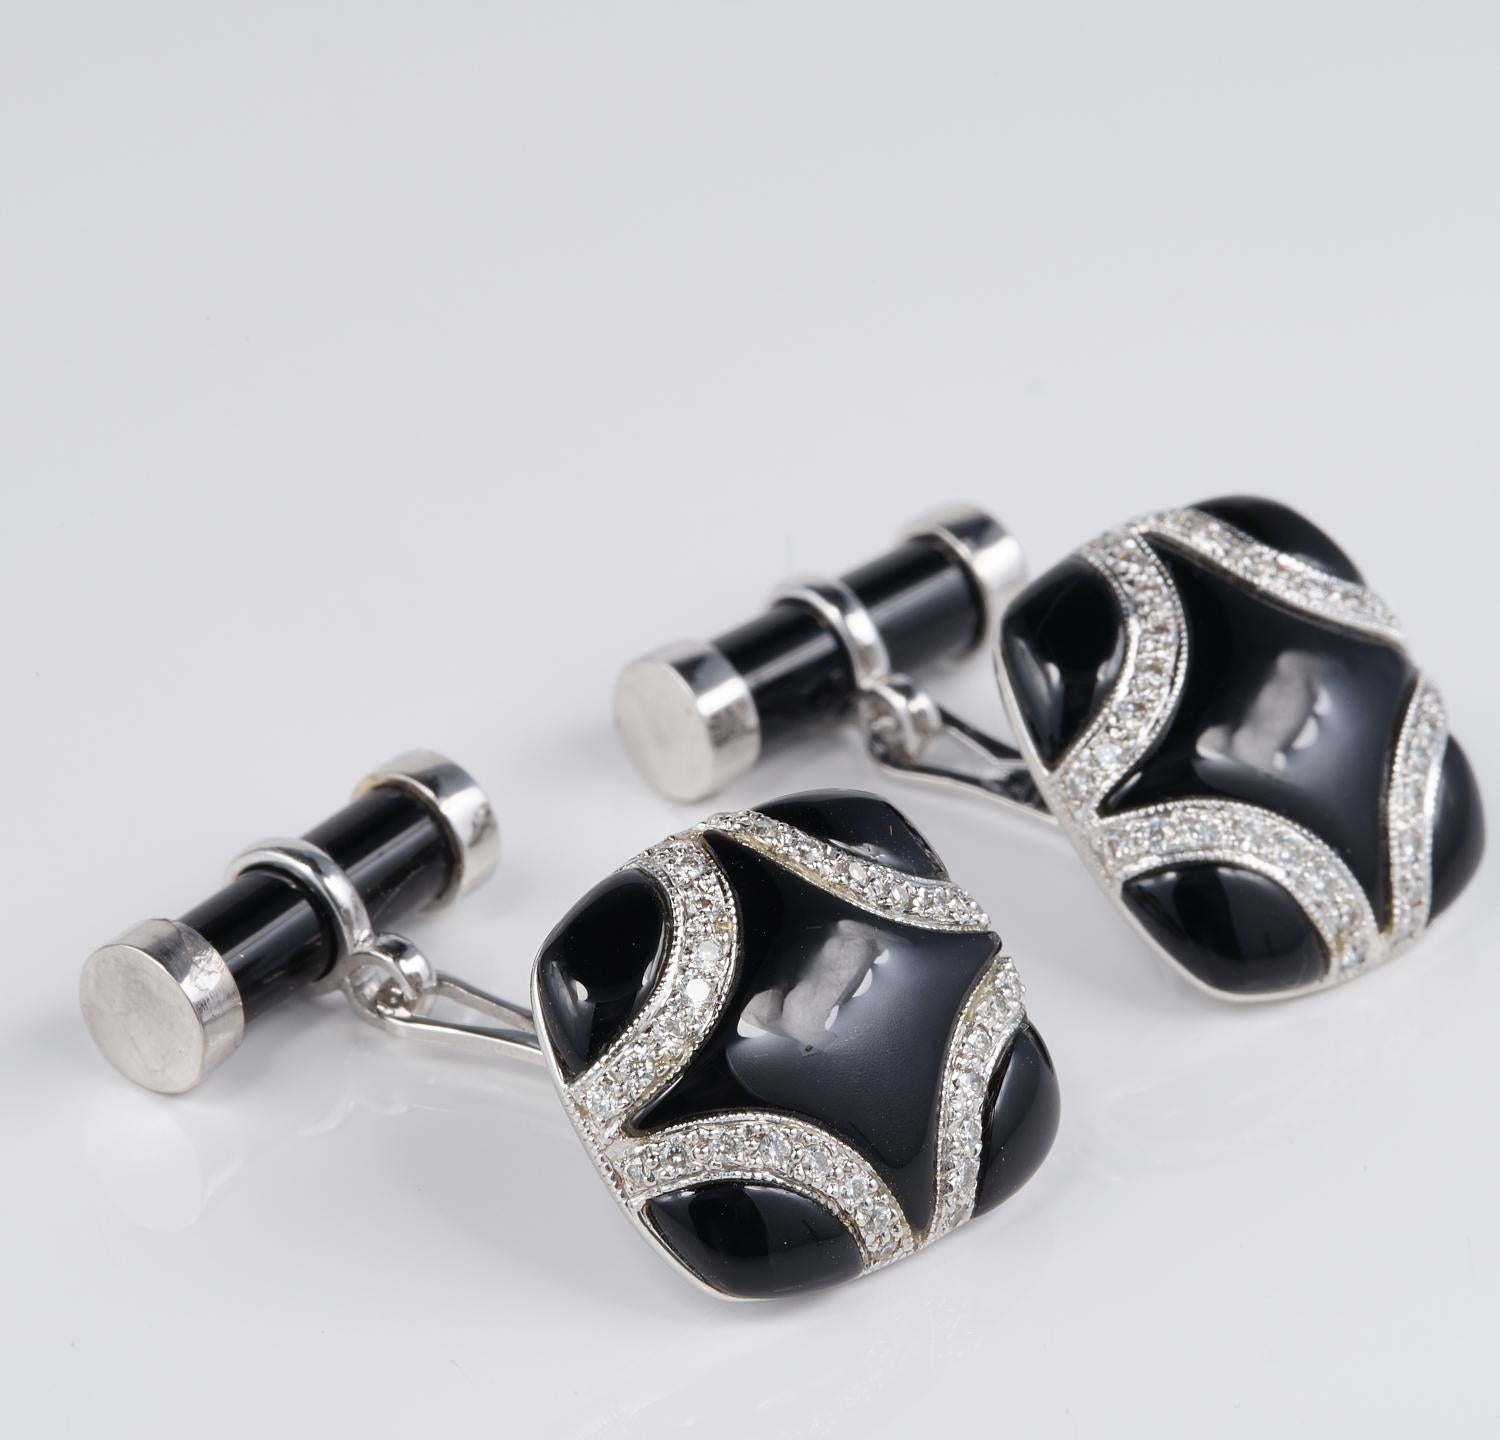 Italian Black Onyx and Diamond gent cufflinks, 1935 ca
Italian Hallmarks of the period
Hand crafted of solid 18 KT
Geometric pattern design in a play of Black and White, with highly polished Black Onyx sections and Diamonds inserts creating a